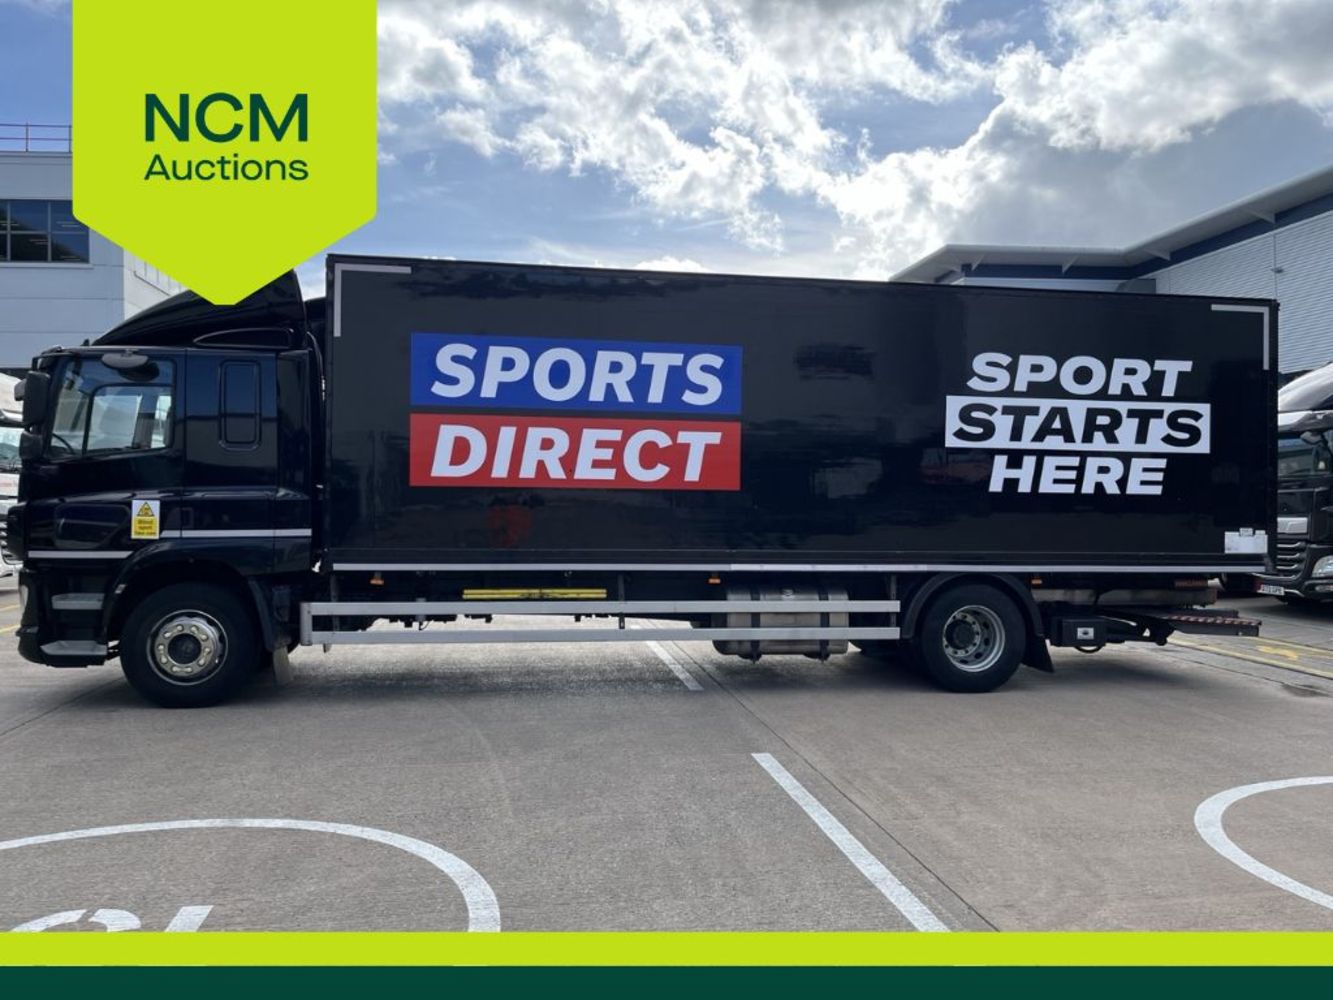 Plant, Machinery & Commercial Vehicles - Featuring Shipping Containers, Industrial Forklifts & DAF Trucks from Retained Client, SPORTS DIRECT